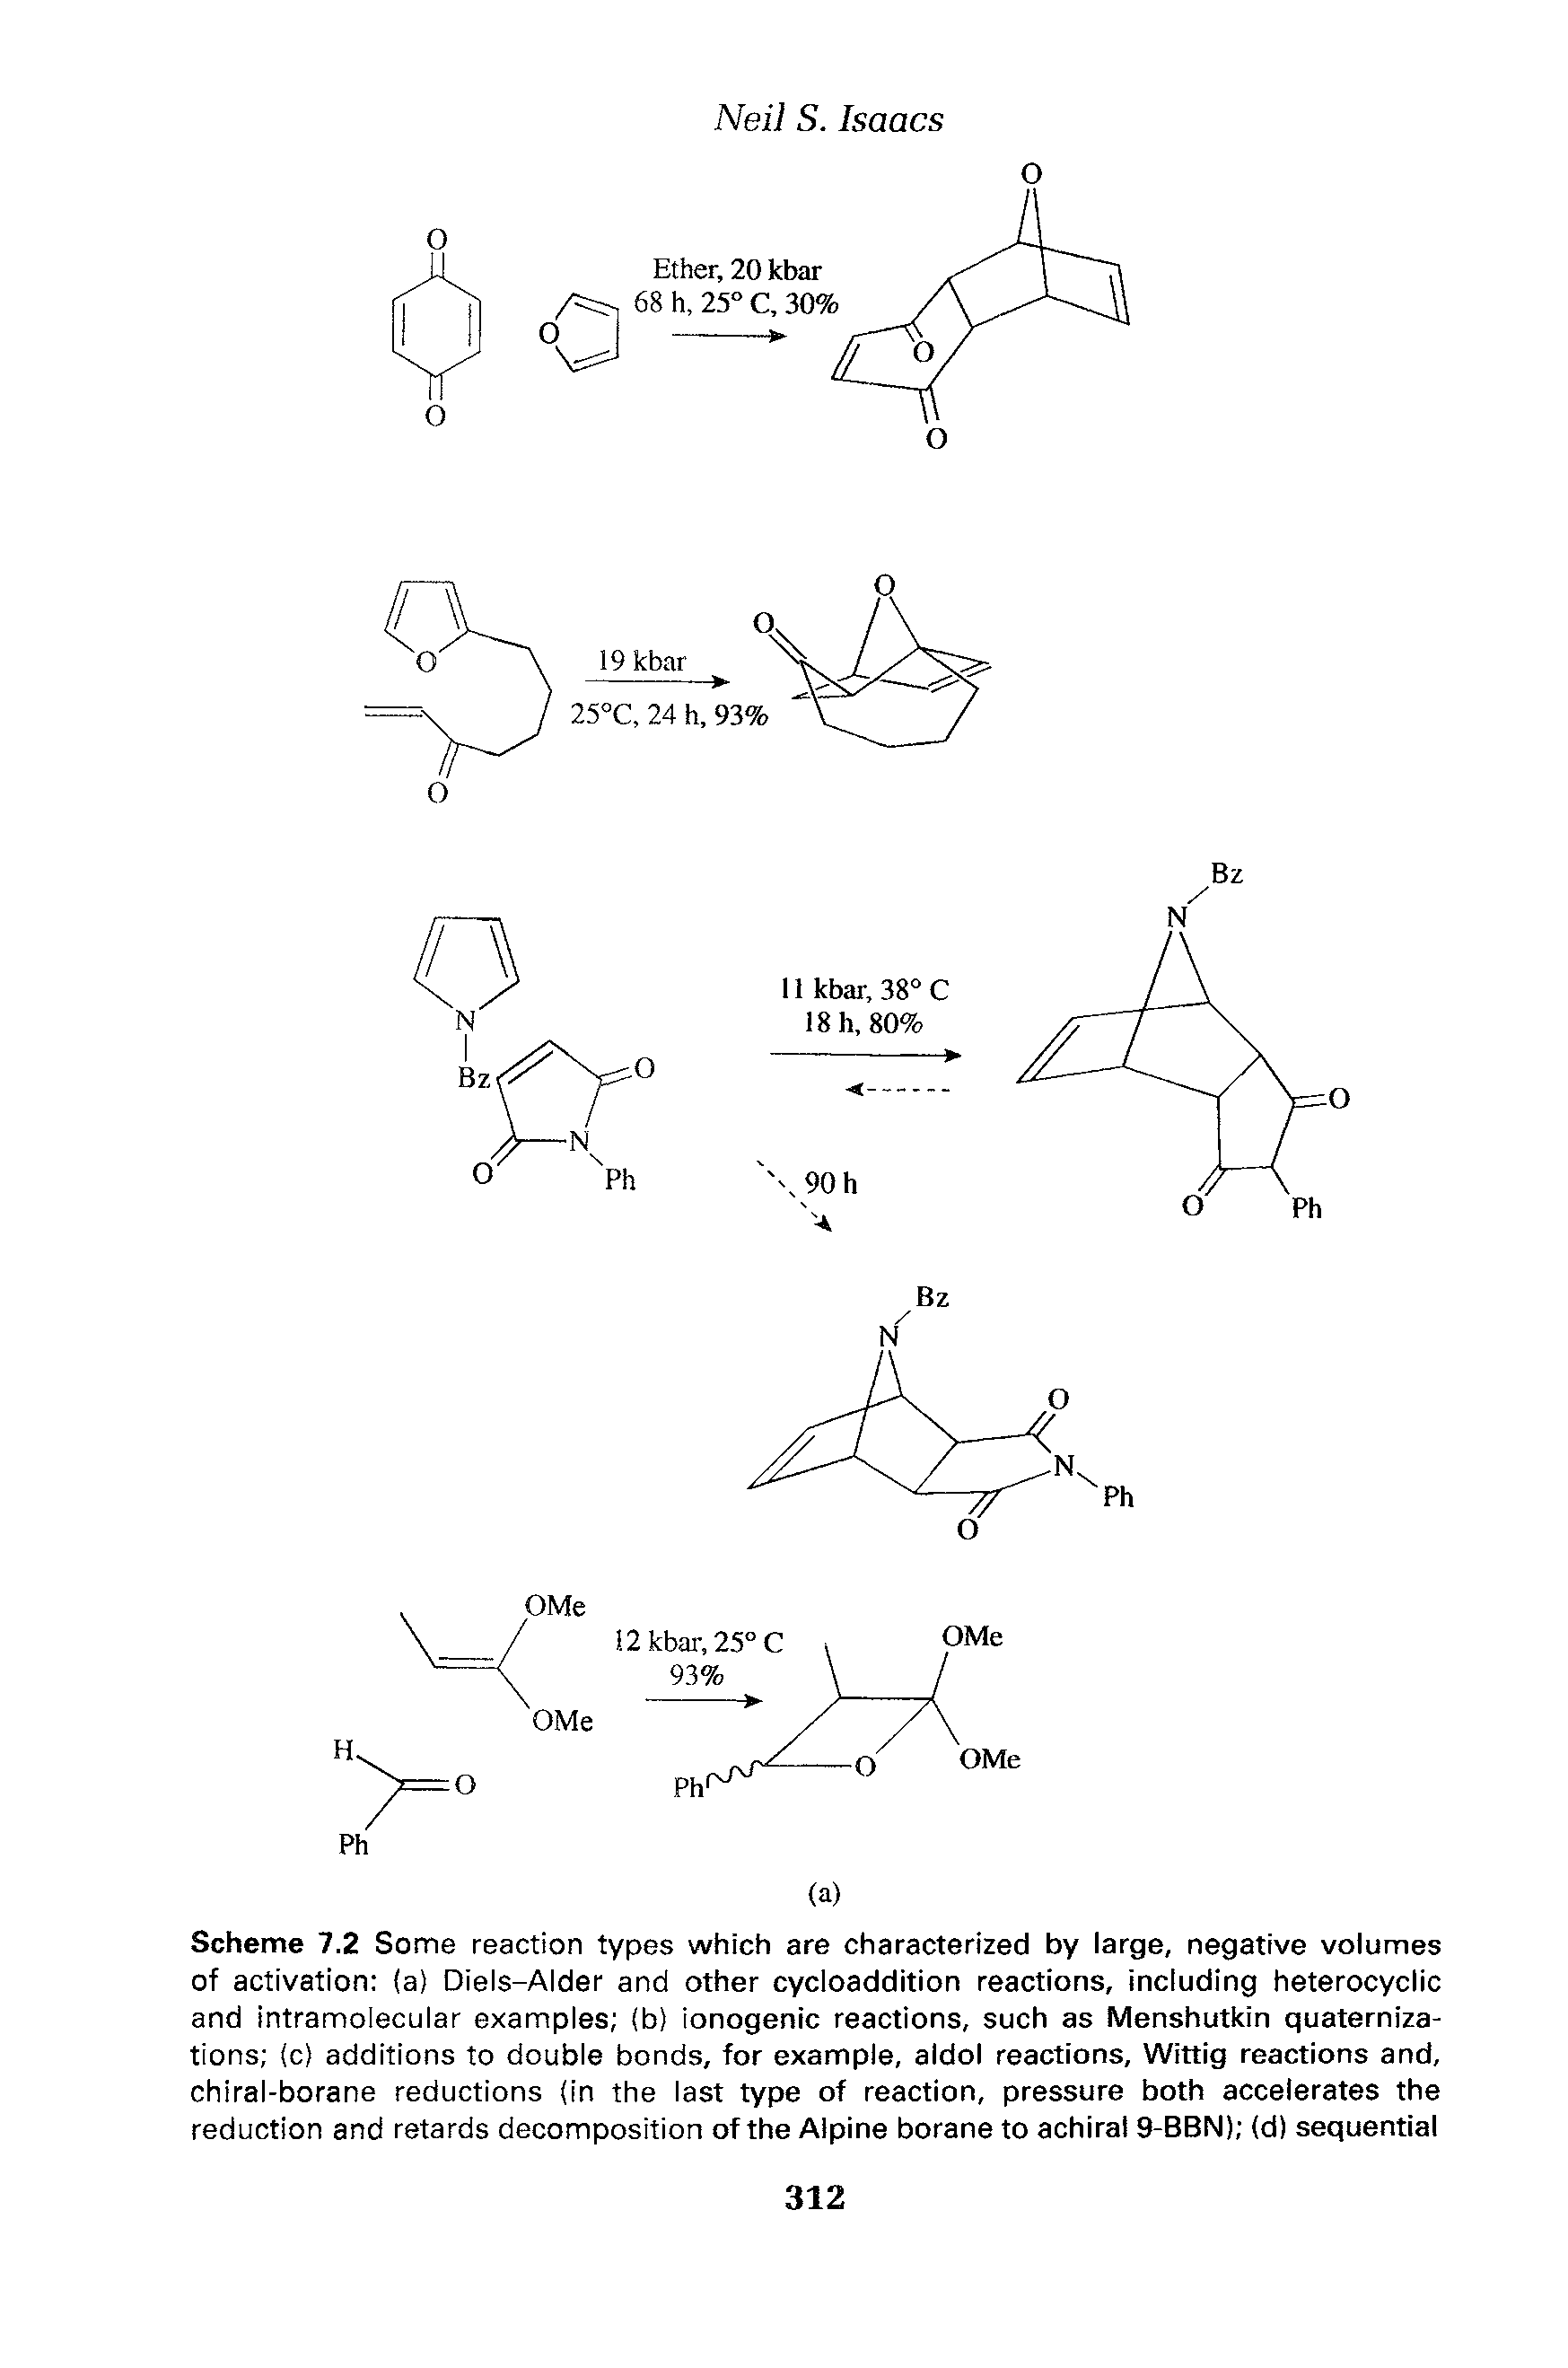 Scheme 7.2 Some reaction types which are characterized by large, negative volumes of activation (a) Diels-Alder and other cycloaddition reactions, including heterocyclic and intramolecular examples (b) ionogenic reactions, such as Menshutkin quaterniza-tions (c) additions to double bonds, for example, aldol reactions, Wittig reactions and, chiral-borane reductions (in the last type of reaction, pressure both accelerates the reduction and retards decomposition of the Alpine borane to achiral 9-BBN) (d) sequential...